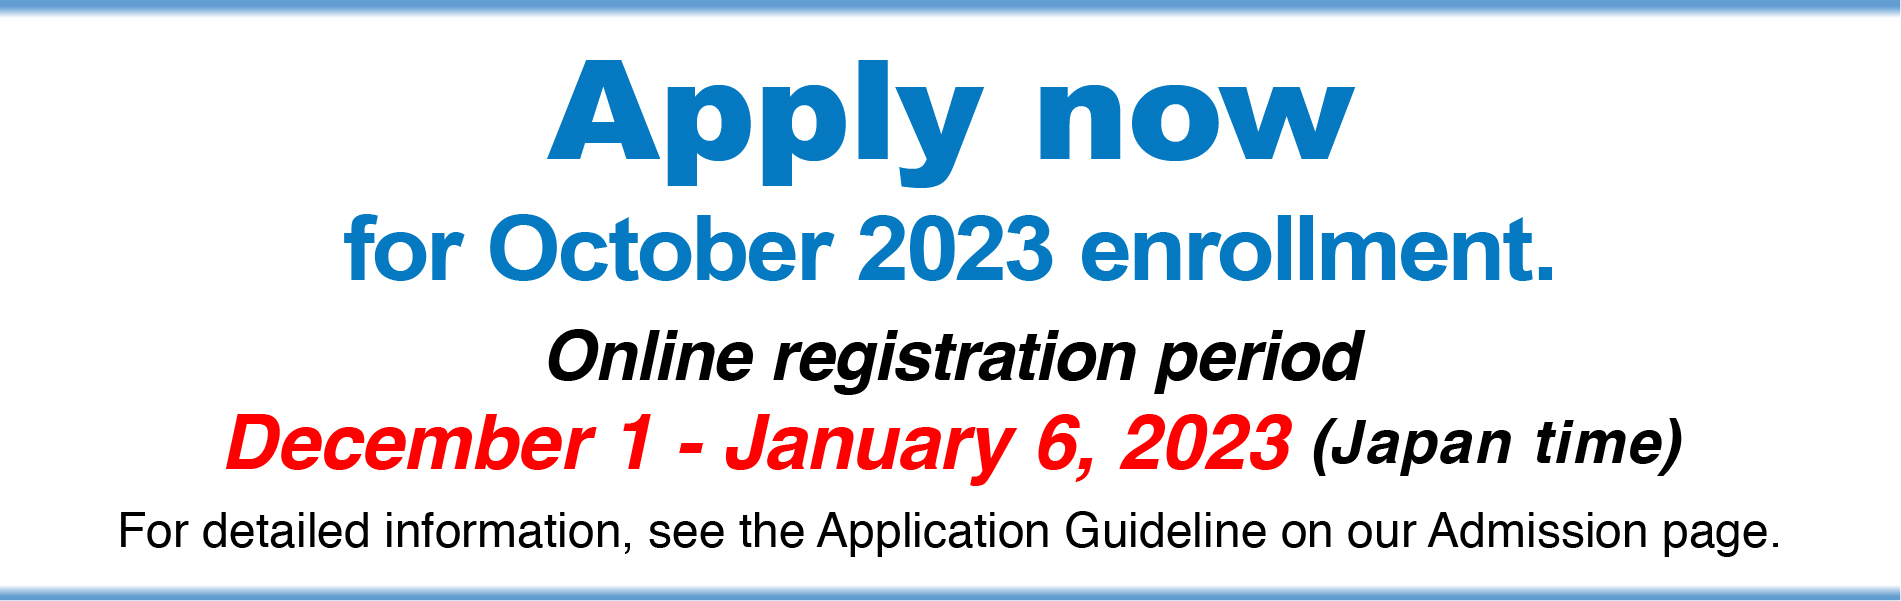 Apply now! Online registration period December 1 - January 6, 2023